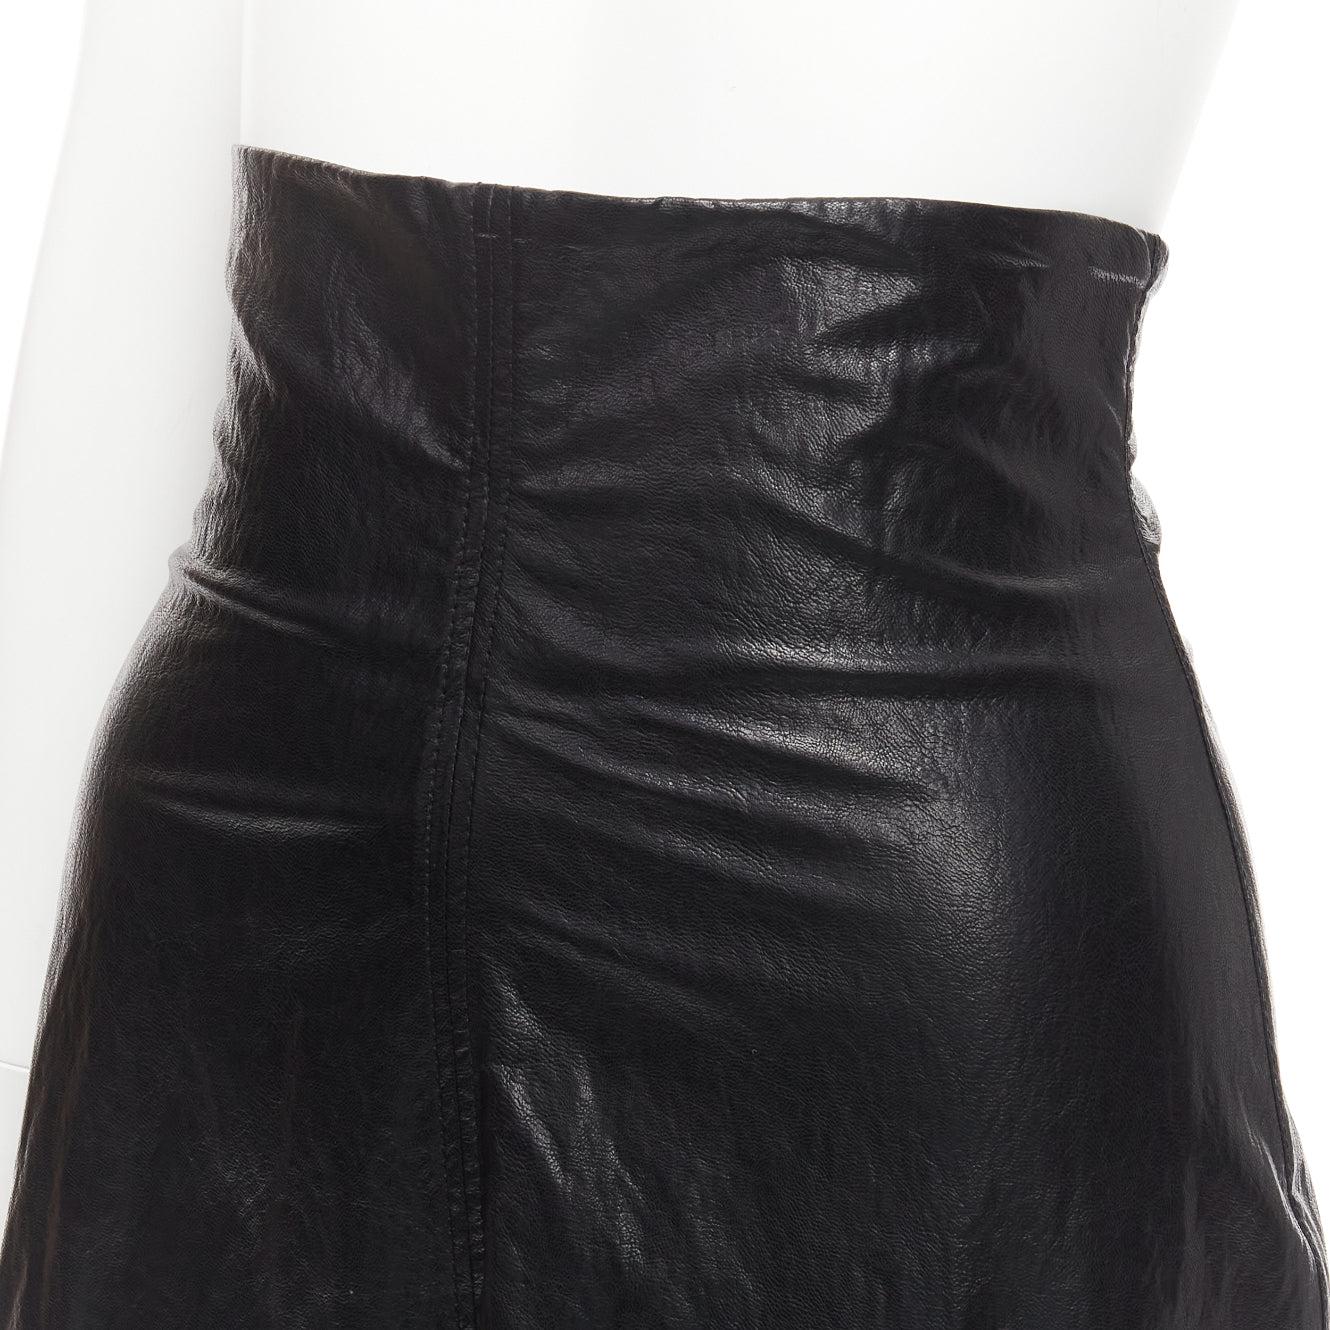 PHILOSOPHY DI LORENZO SERAFINI black faux crinkled leather A-line skirt IT38 XS
Reference: AAWC/A00582
Brand: Philosophy
Designer: Lorenzo Serafini
Material: Viscose, Polyester, Cotton
Color: Black
Pattern: Solid
Closure: Zip
Extra Details: High